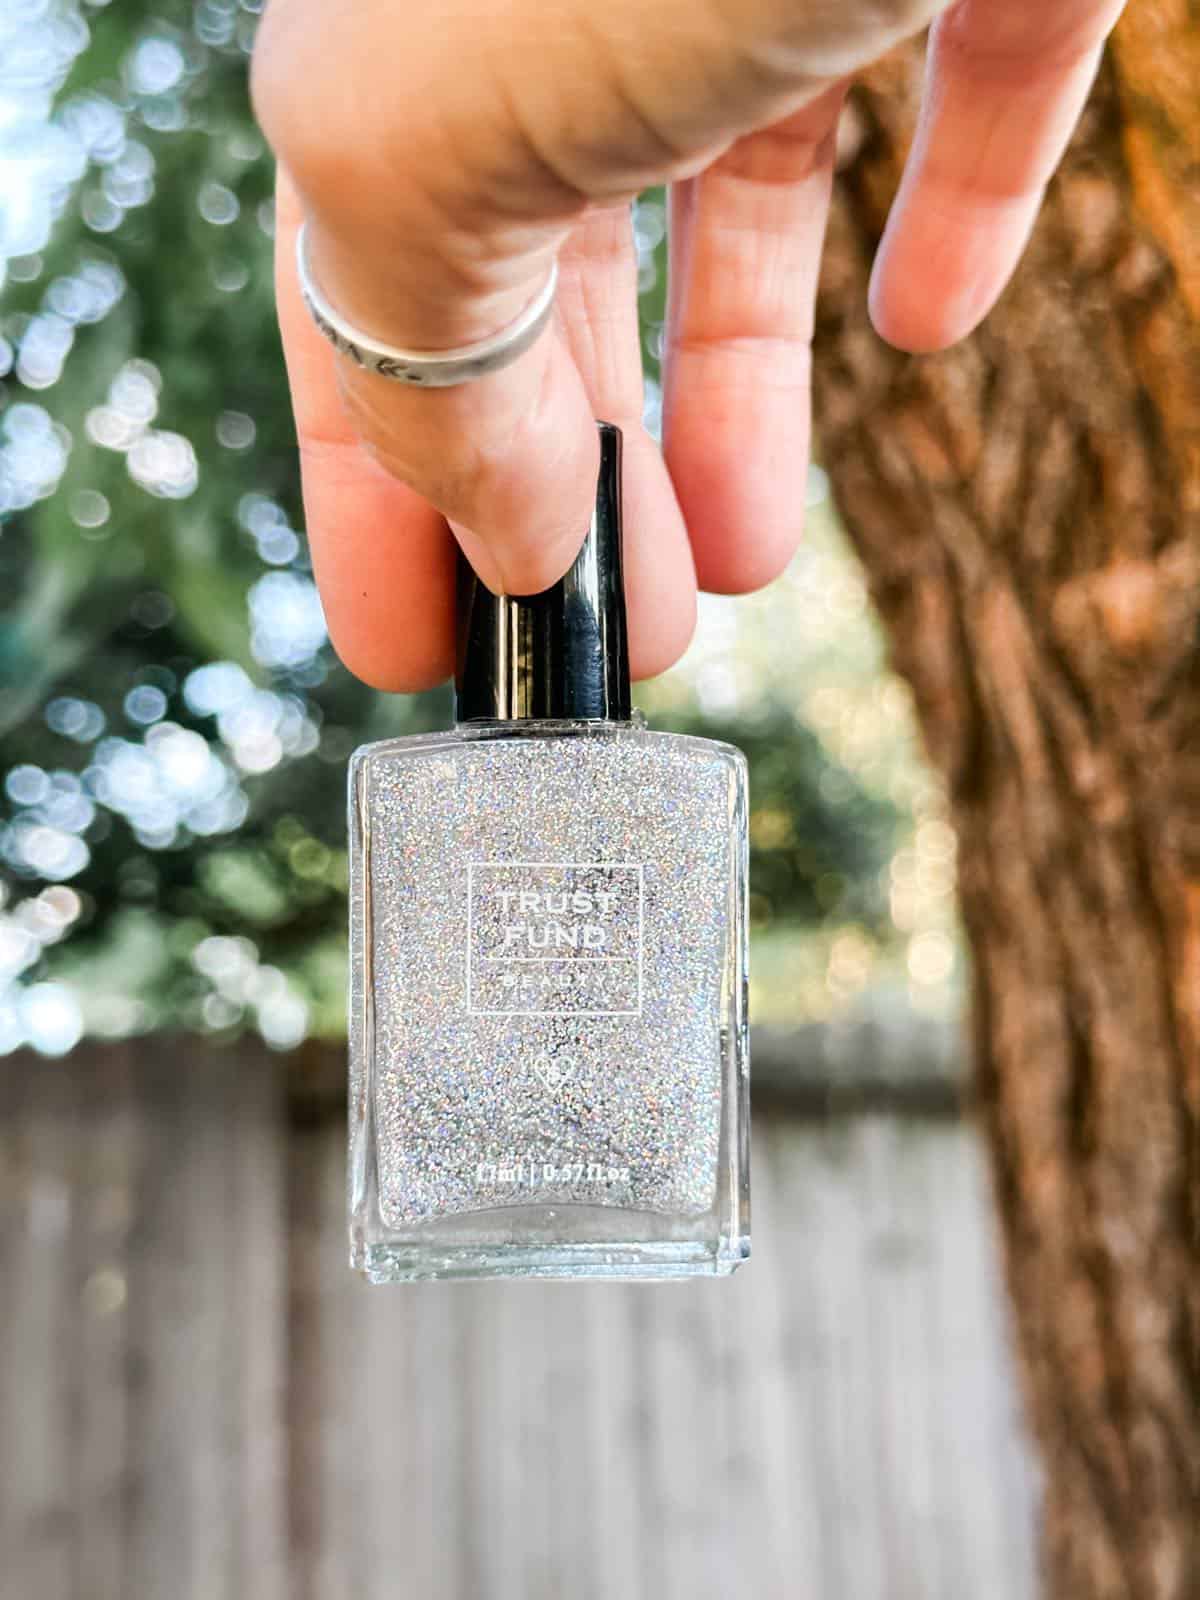 Silver sparkly nail polish from Trust Fund Beauty in cruelty-free vegan bottle.